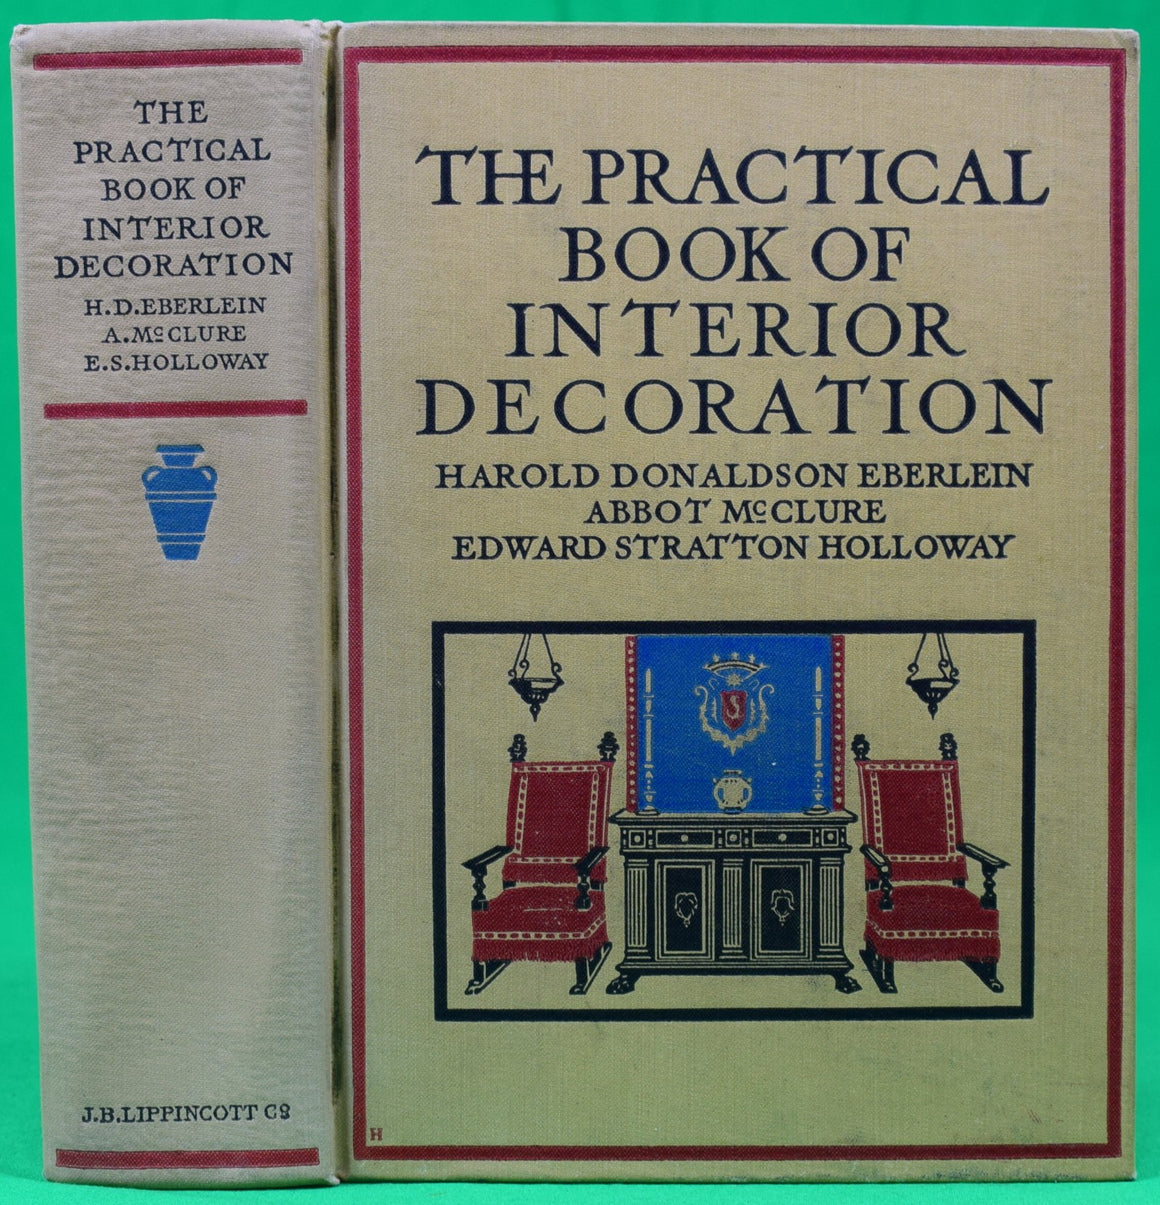 "The Practical Book Of Interior Decoration" 1919 EBERLEIN, Harold Donaldson, MCCLURE, Abbot, and HOLLOWAY, Edward Stratton